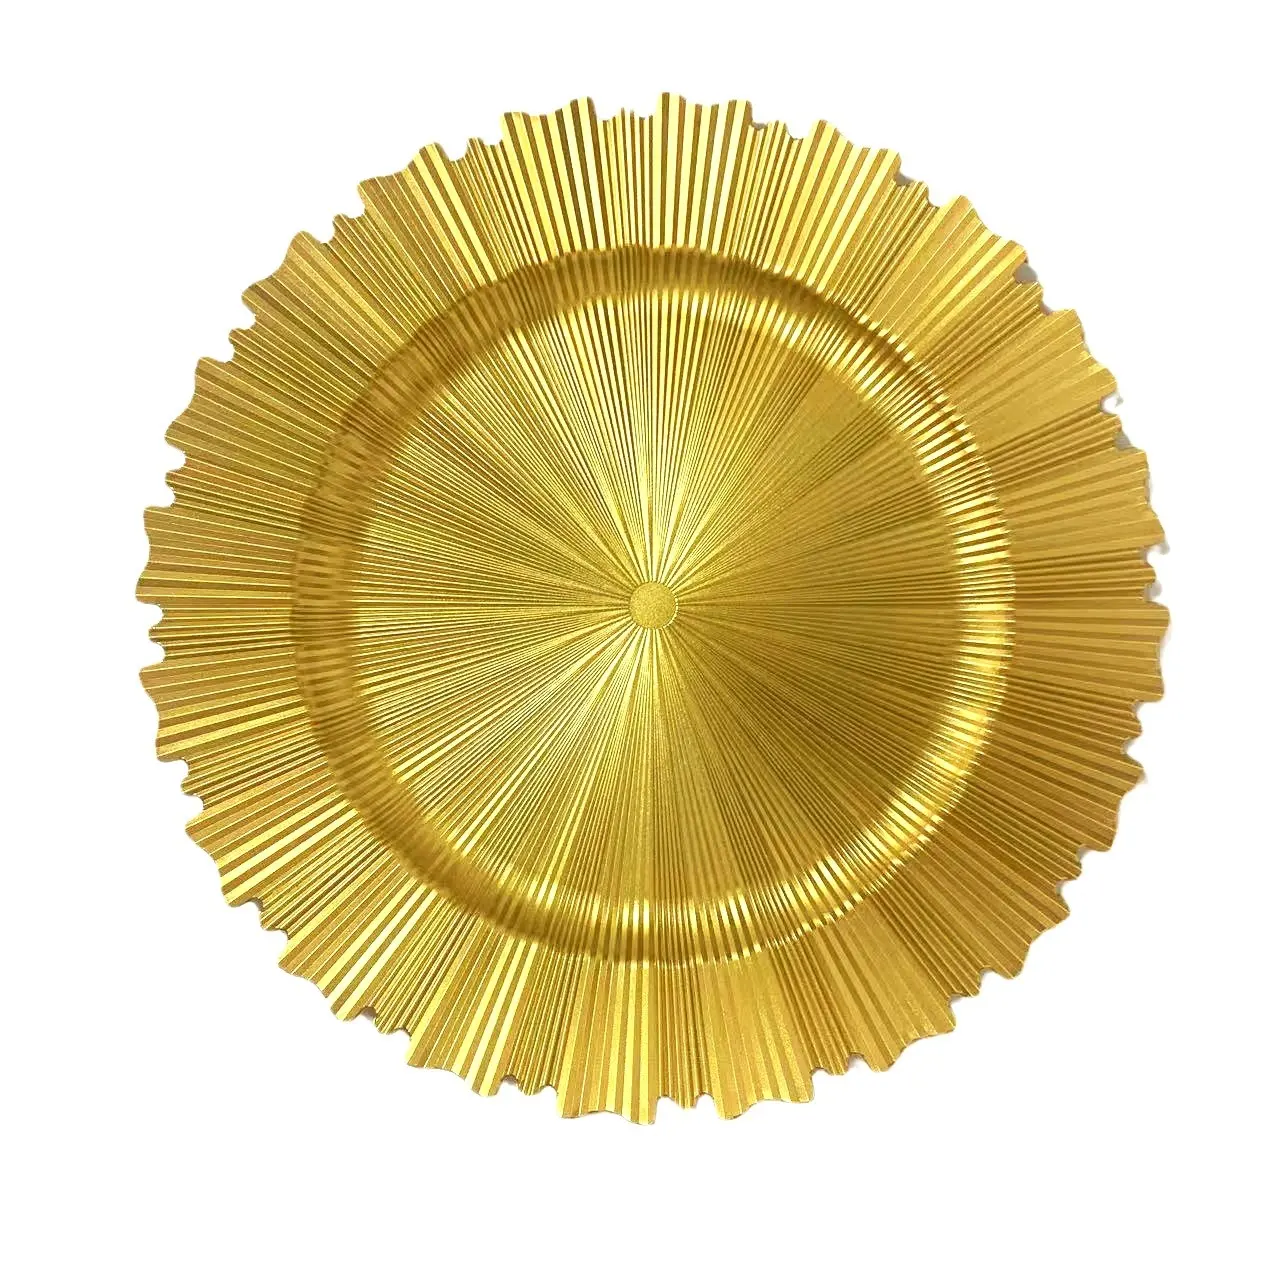 13 inch Gold Reef plastic Charger Plates Wedding Wholesale Western Steak Pad Table Chargers Plates For Wedding Party